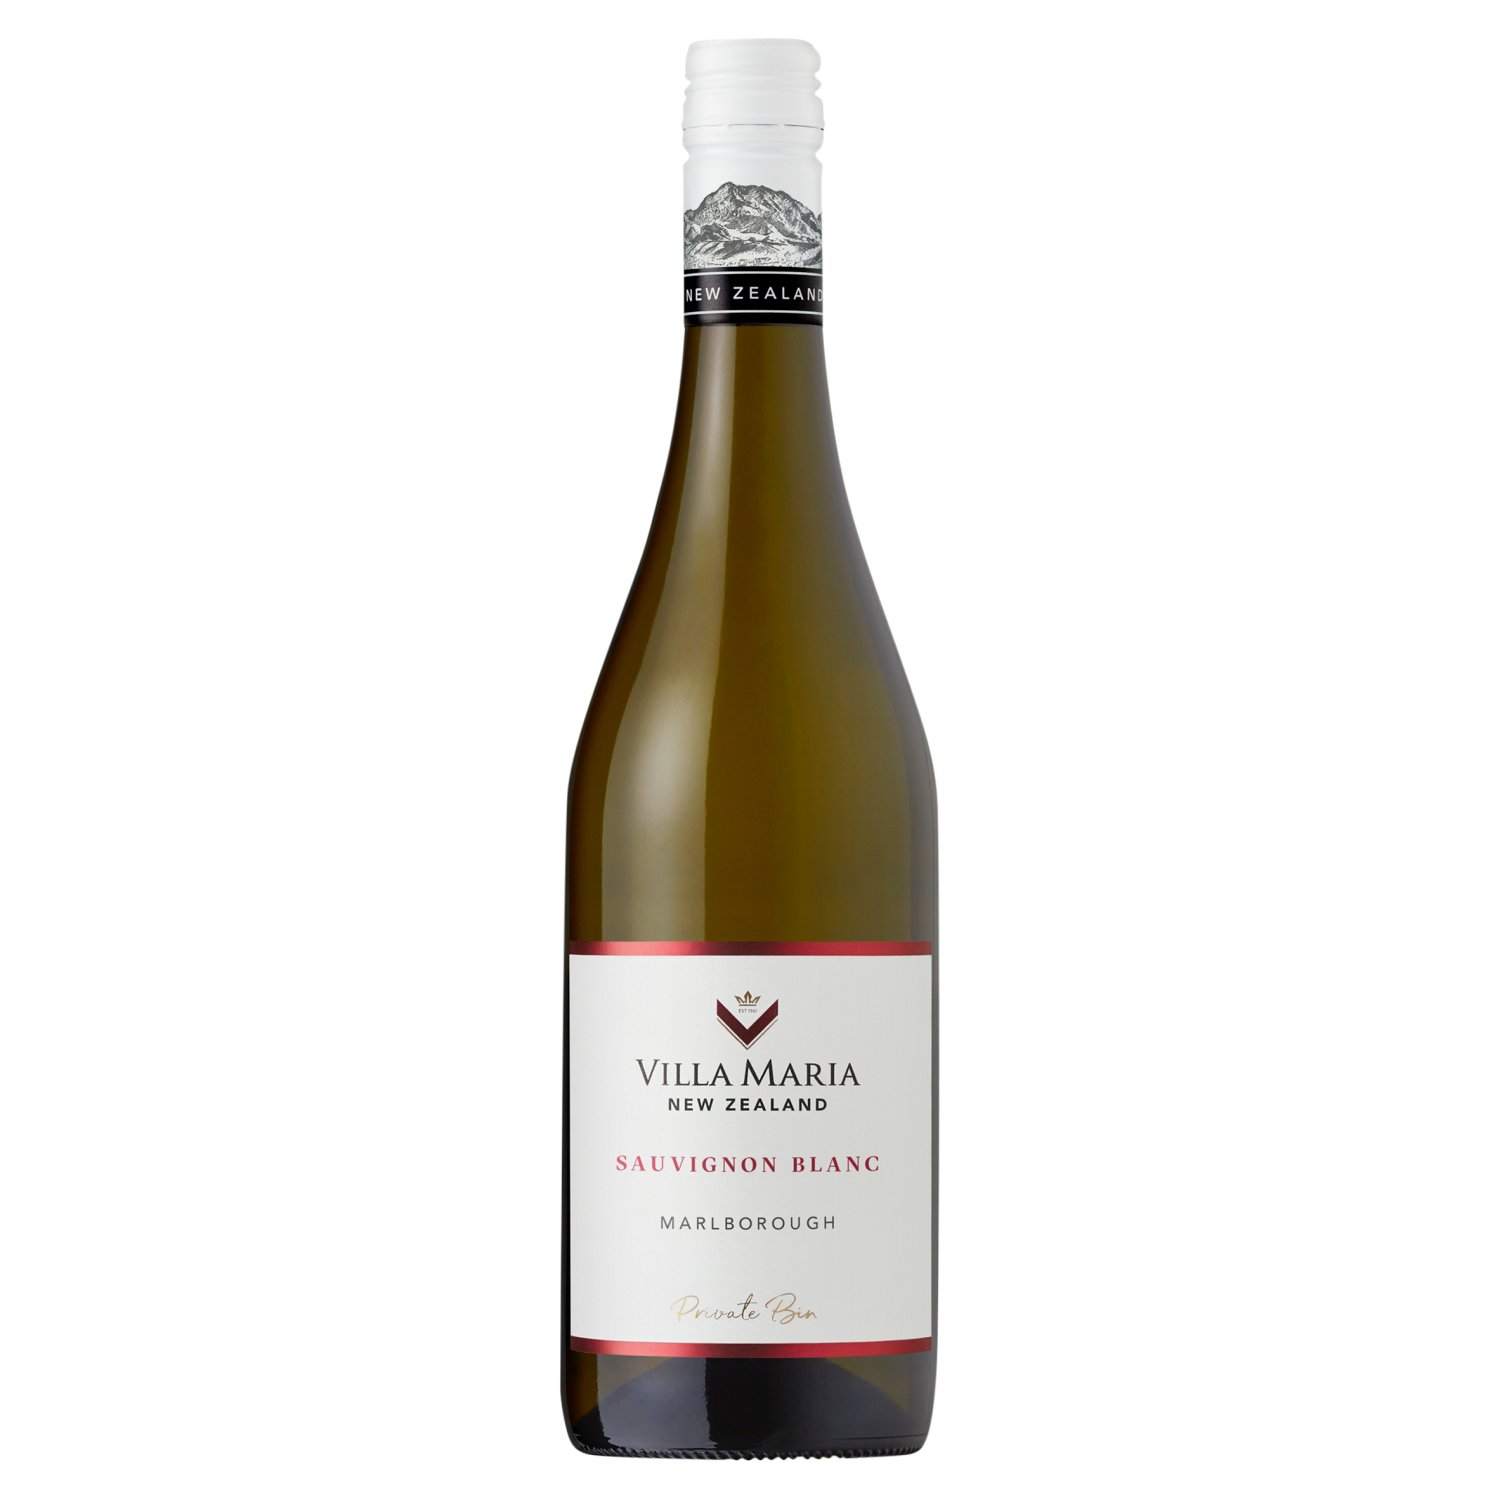 Grown between wild oceans, ancient river valleys and towering mountains, then bottled at our winery in the crater of a volcano, villa Maria private bin sauvignon blanc is an iconic New Zealand wine. Unleash the essence of Marlborough with vibrant flavours of passionfruit and fresh Kaffir lime.